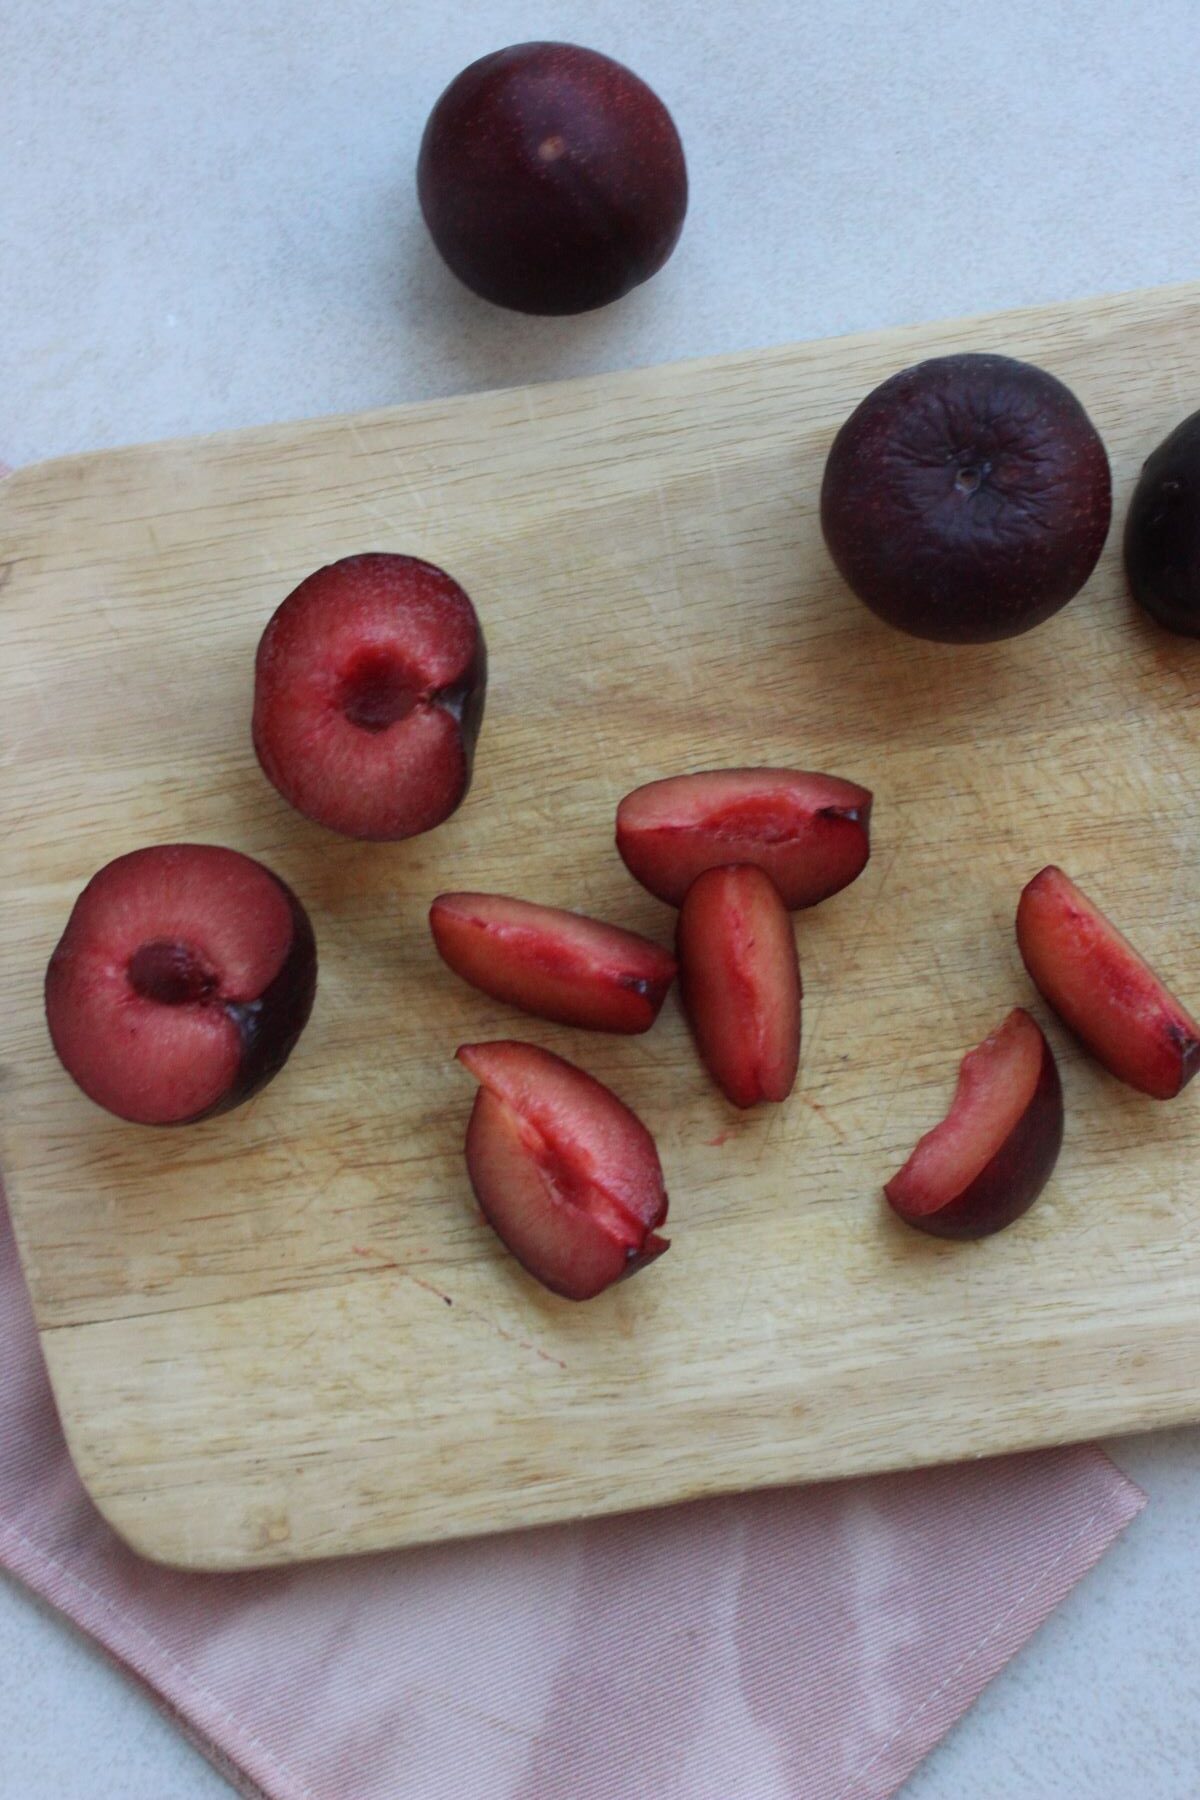 Plums, plums cut in half, and sliced plum on a wooden board.